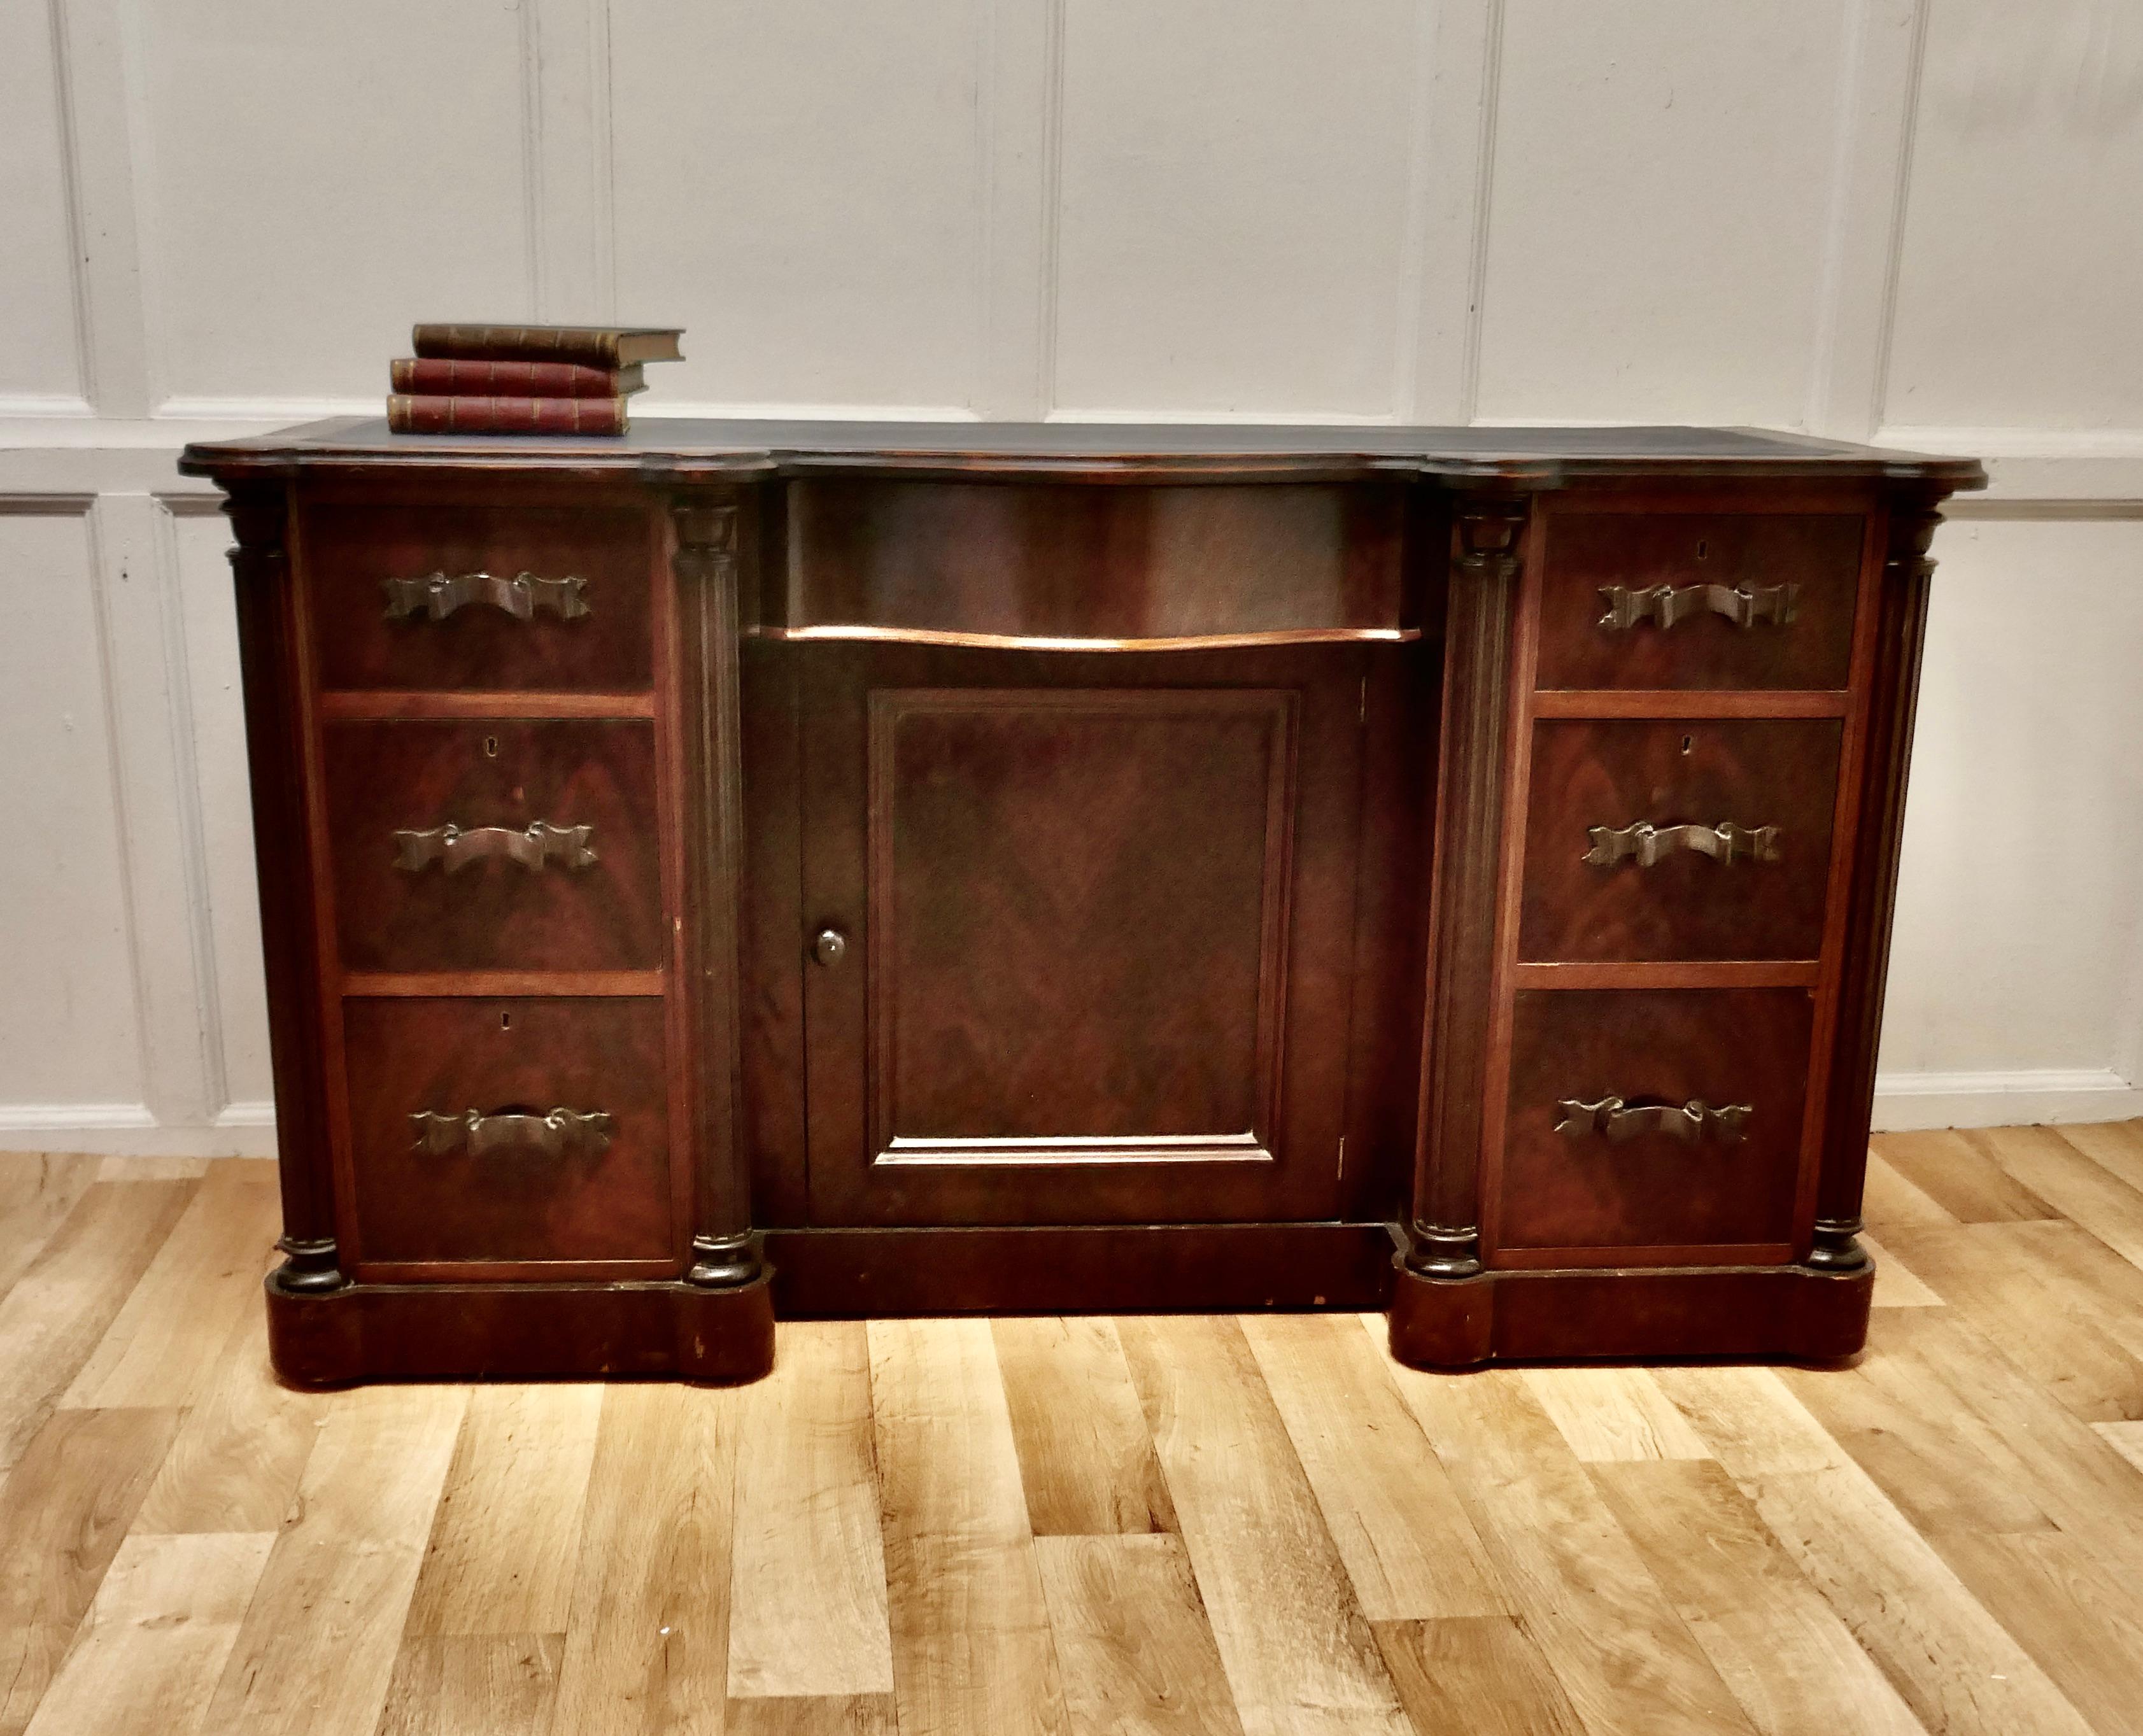 Arts & Crafts flame mahogany knee hole writing desk.

This superb desk is in one piece it has twin pedestals with a shelved cupboard and a concealed bow front drawer in the centre, the top is a twin pedestal serpentine shape and the leather is